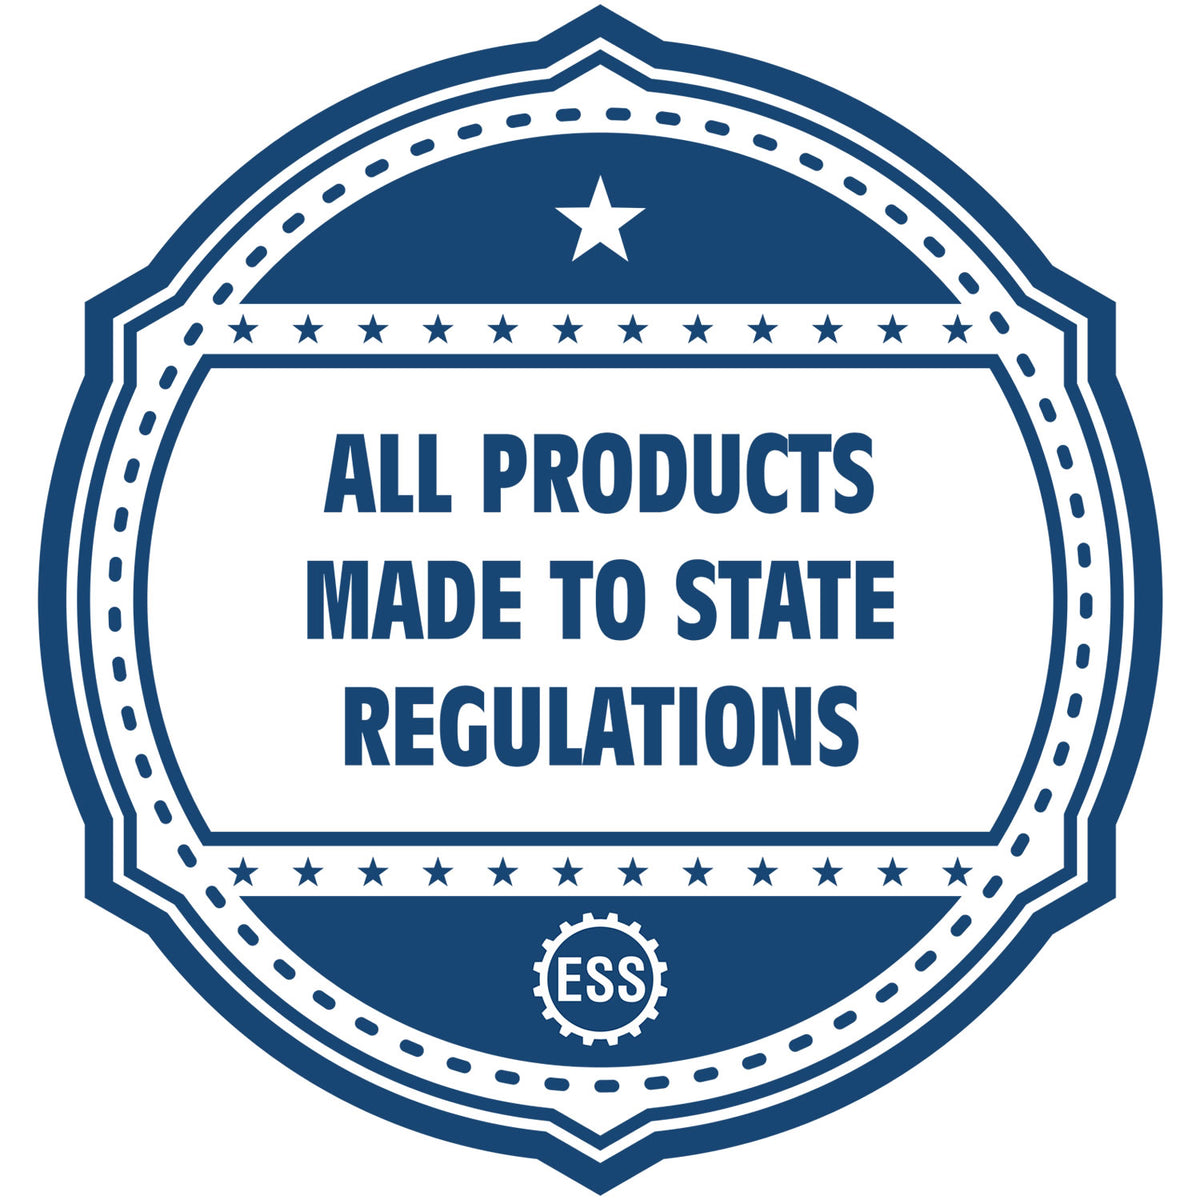 An icon or badge element for the Long Reach Hawaii PE Seal showing that this product is made in compliance with state regulations.